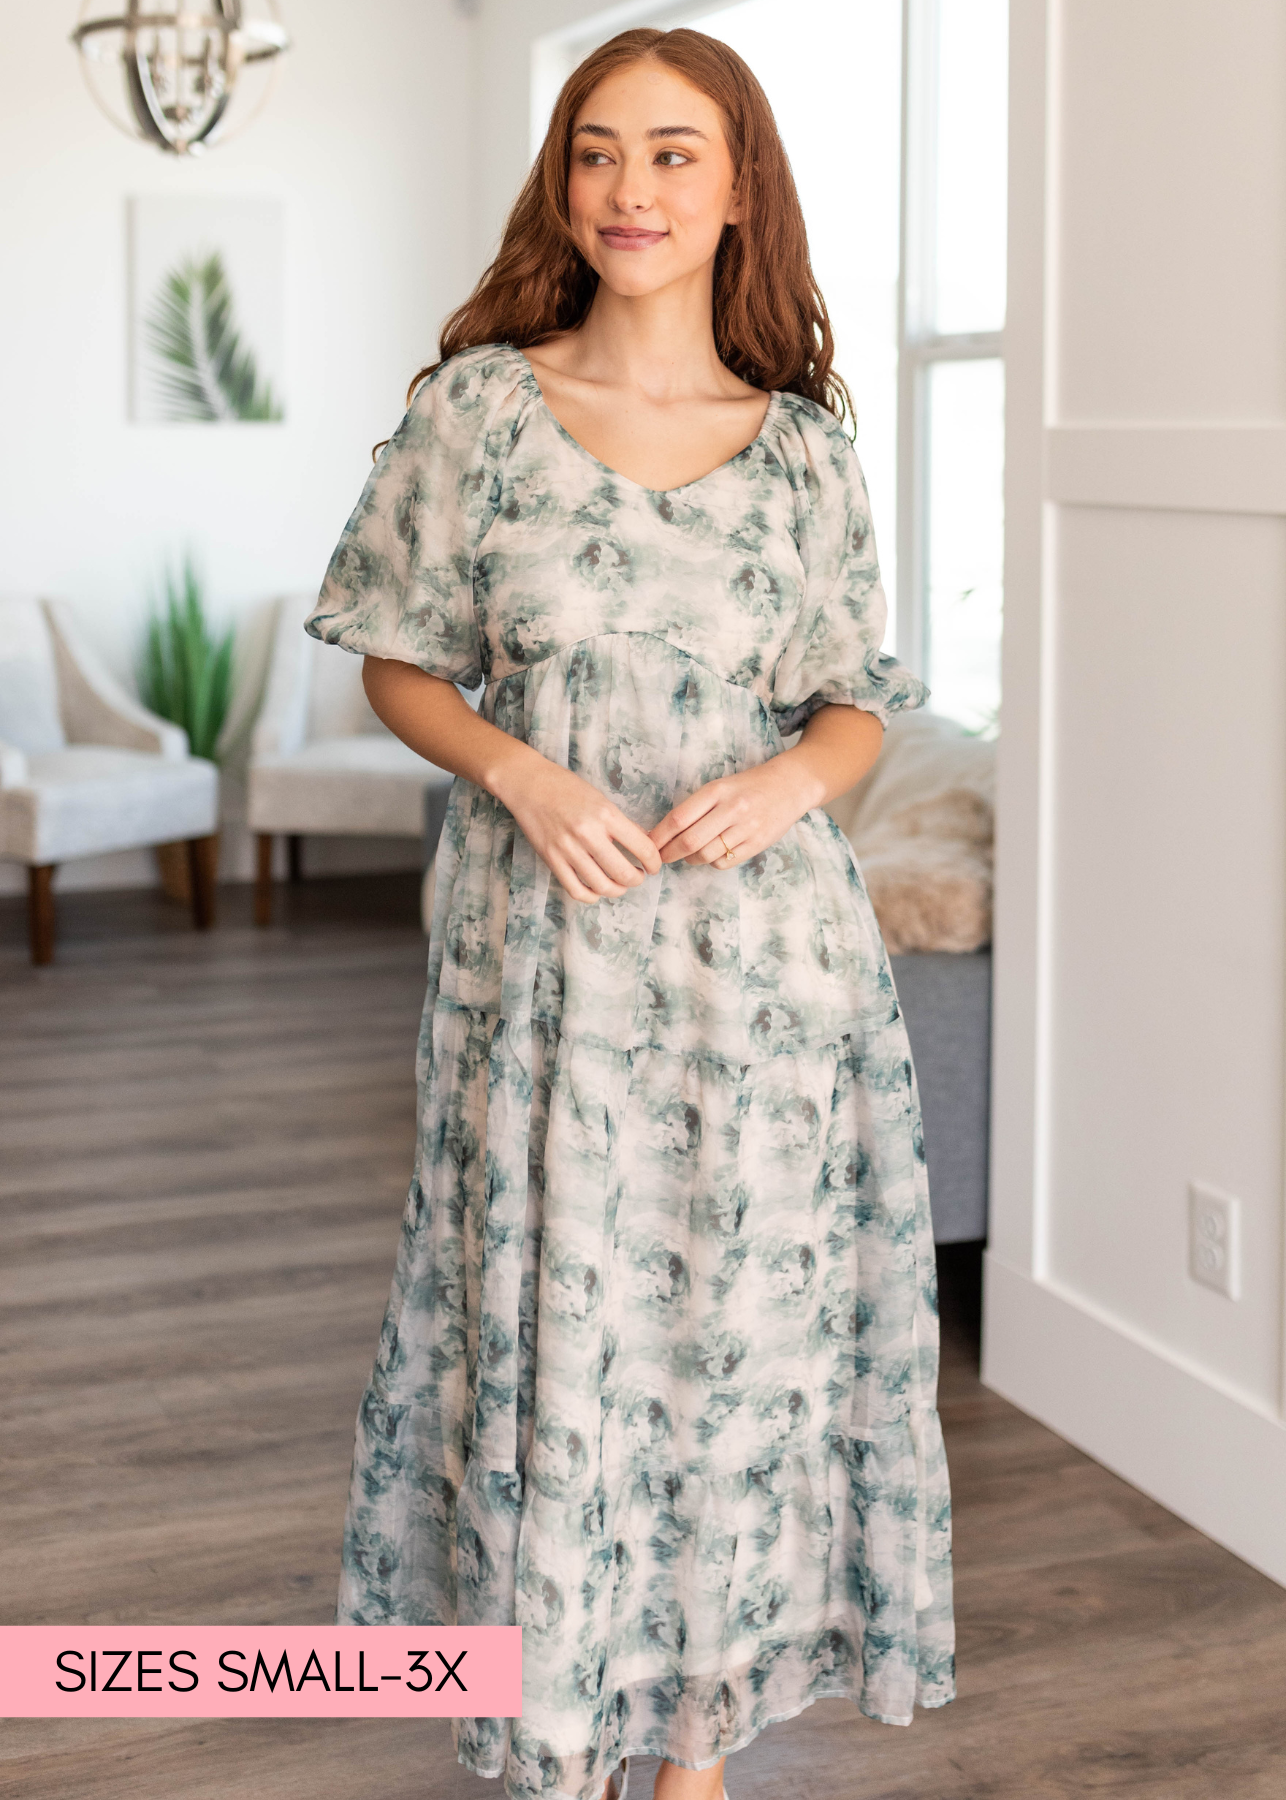 Green floral dress with high waist and short sleeves